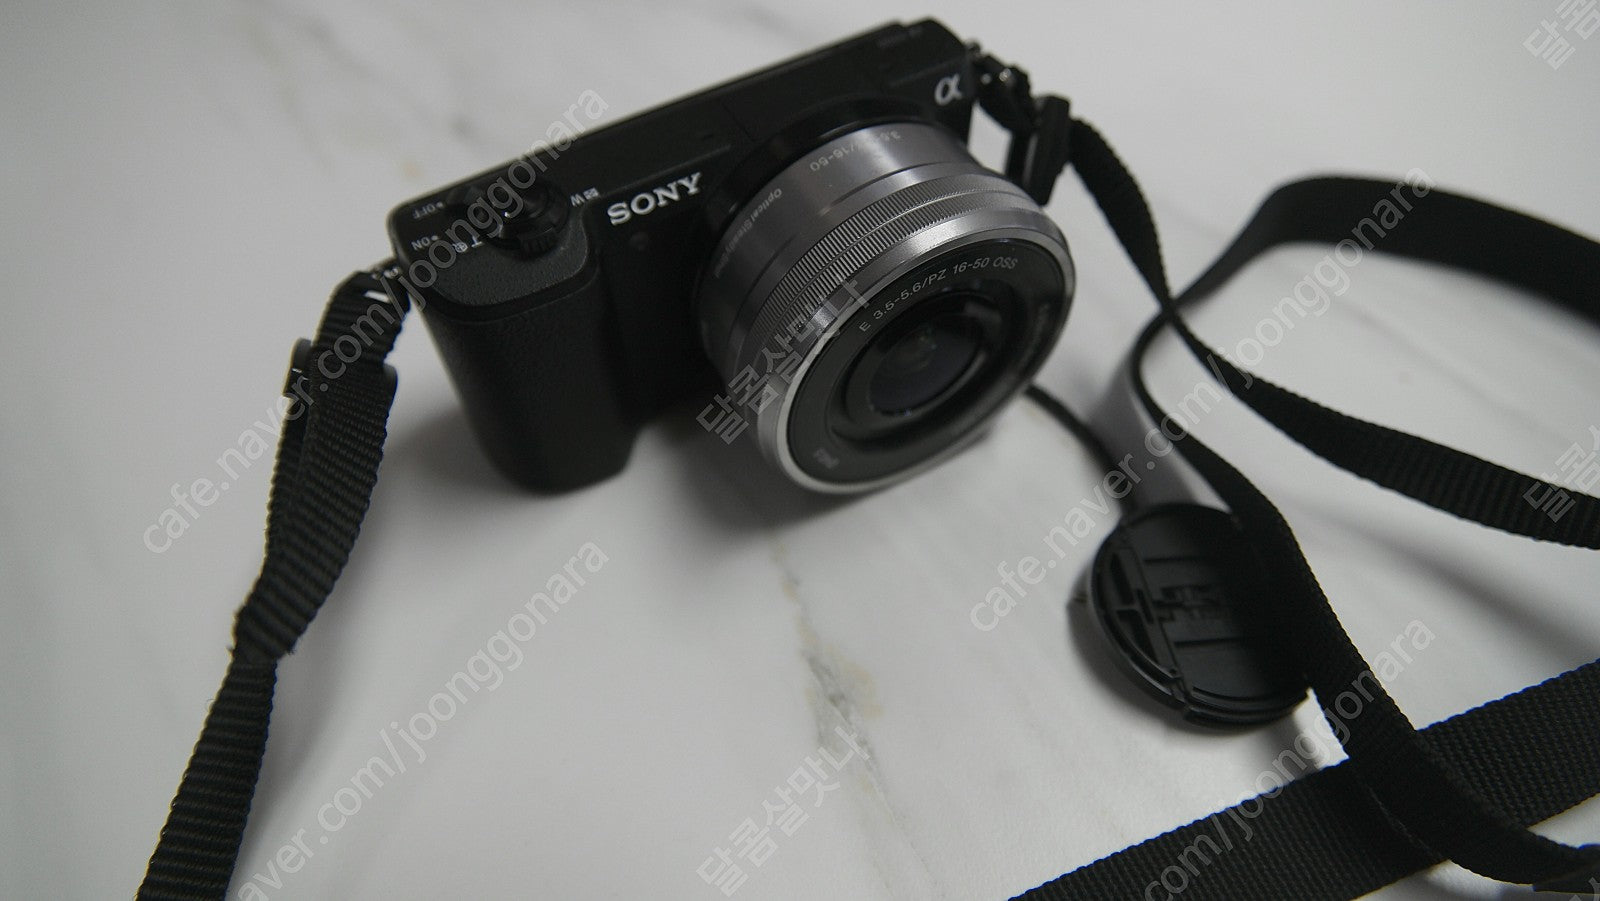 Sony Alpha A5100 24.3MP Digital Camera with 16-50mm Lens Used White Bl –